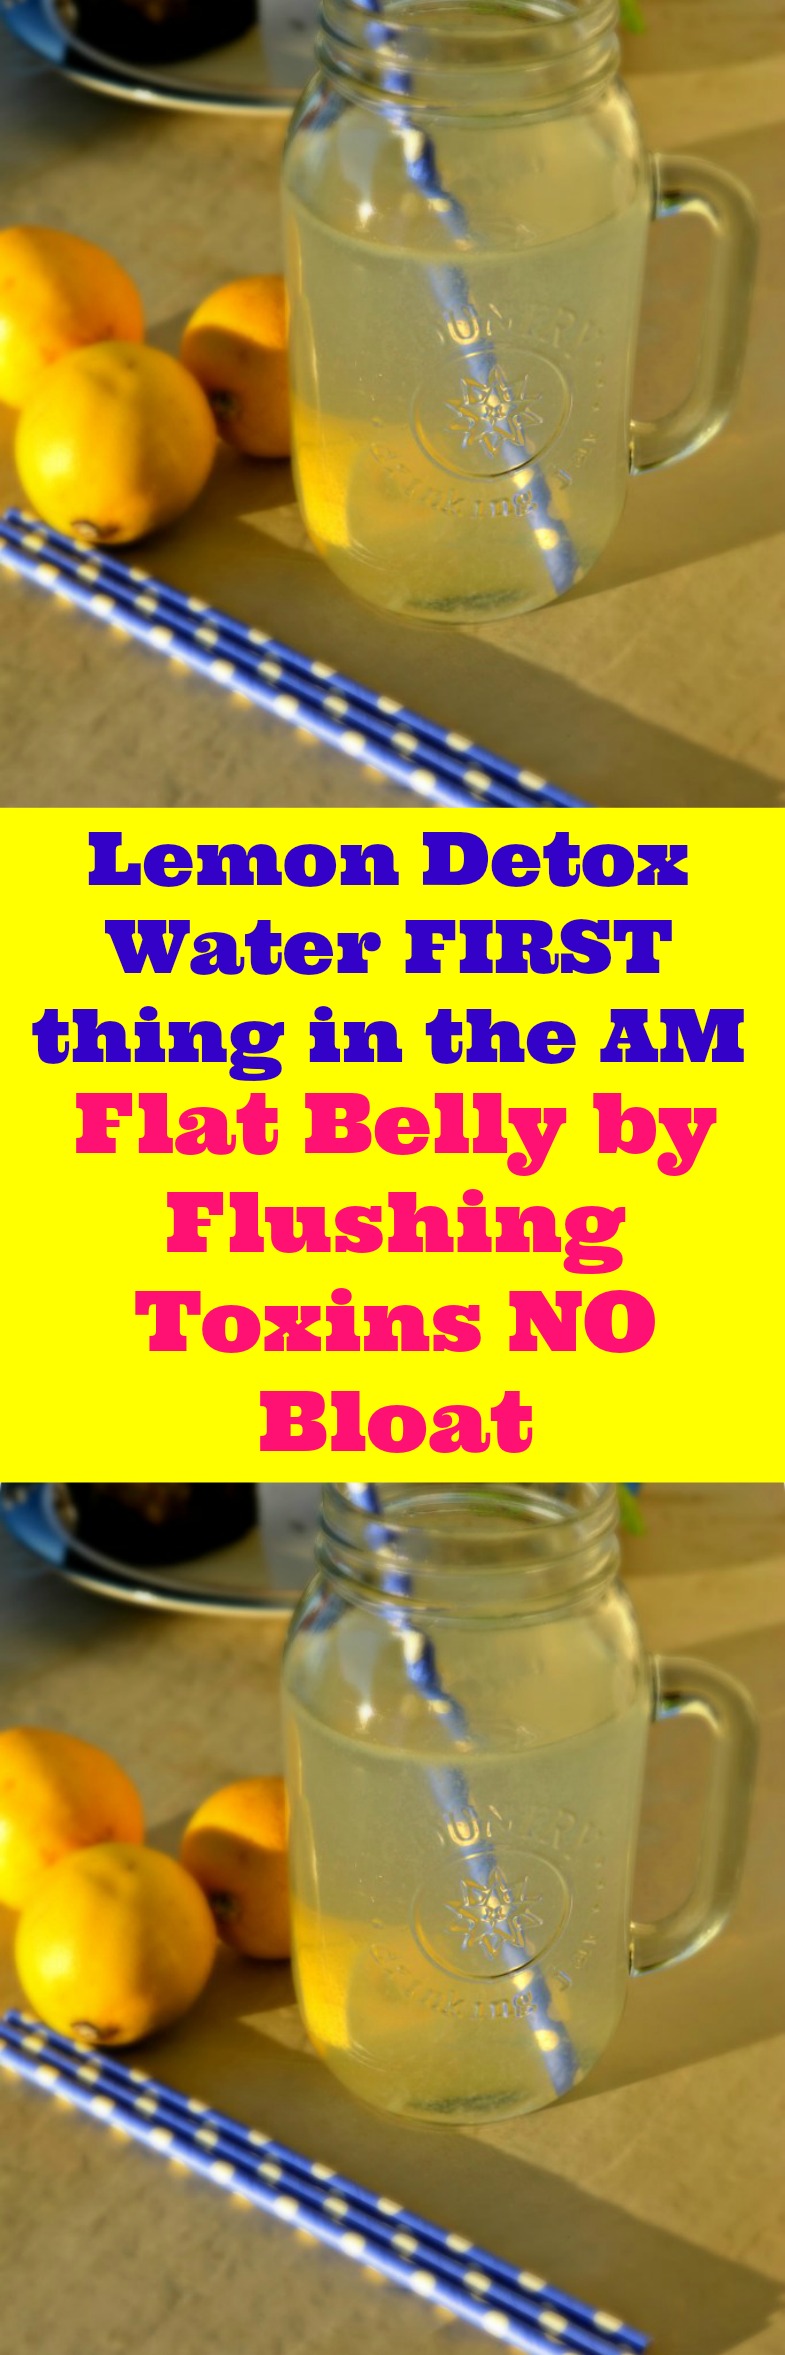 Drink first thing in the morning for weight loss and better digestion. Bloating will not occur. The benefits of lemons alkalize your body for better PH balance.